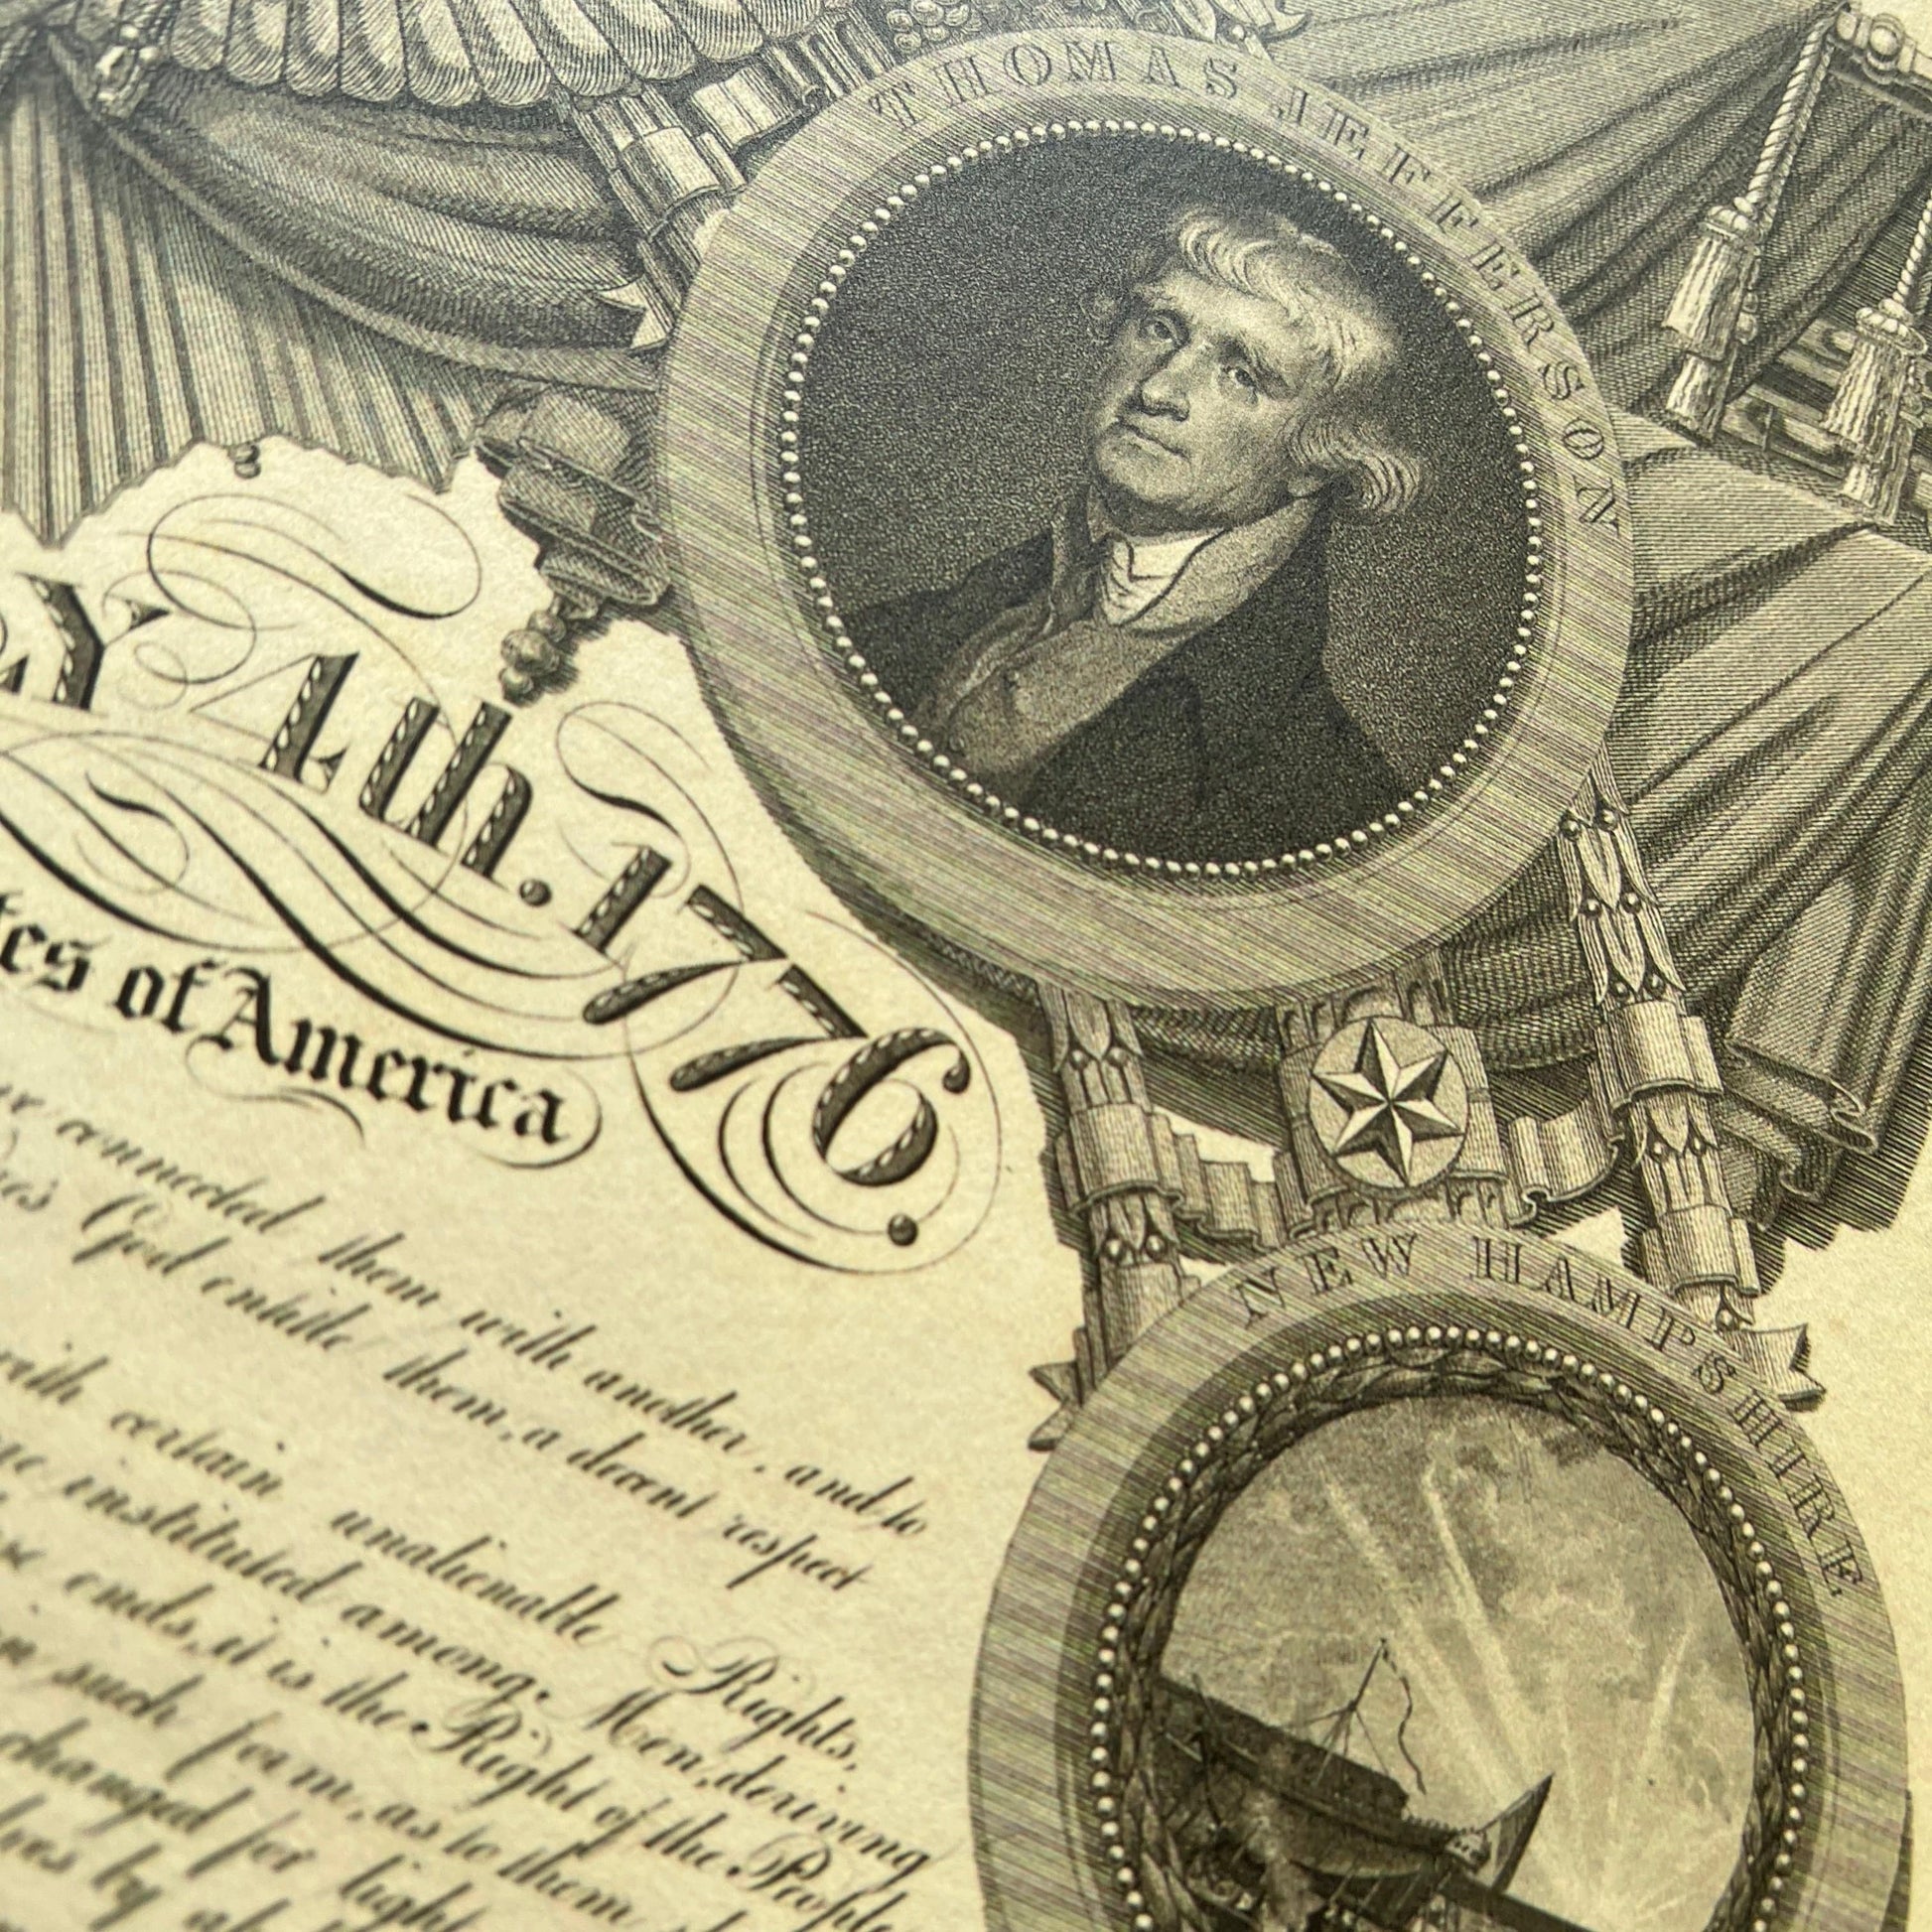 Close-up of Jefferson in Historic "Declaration of Independence" engraving by publisher John Binns Archival print from The HIstory List store